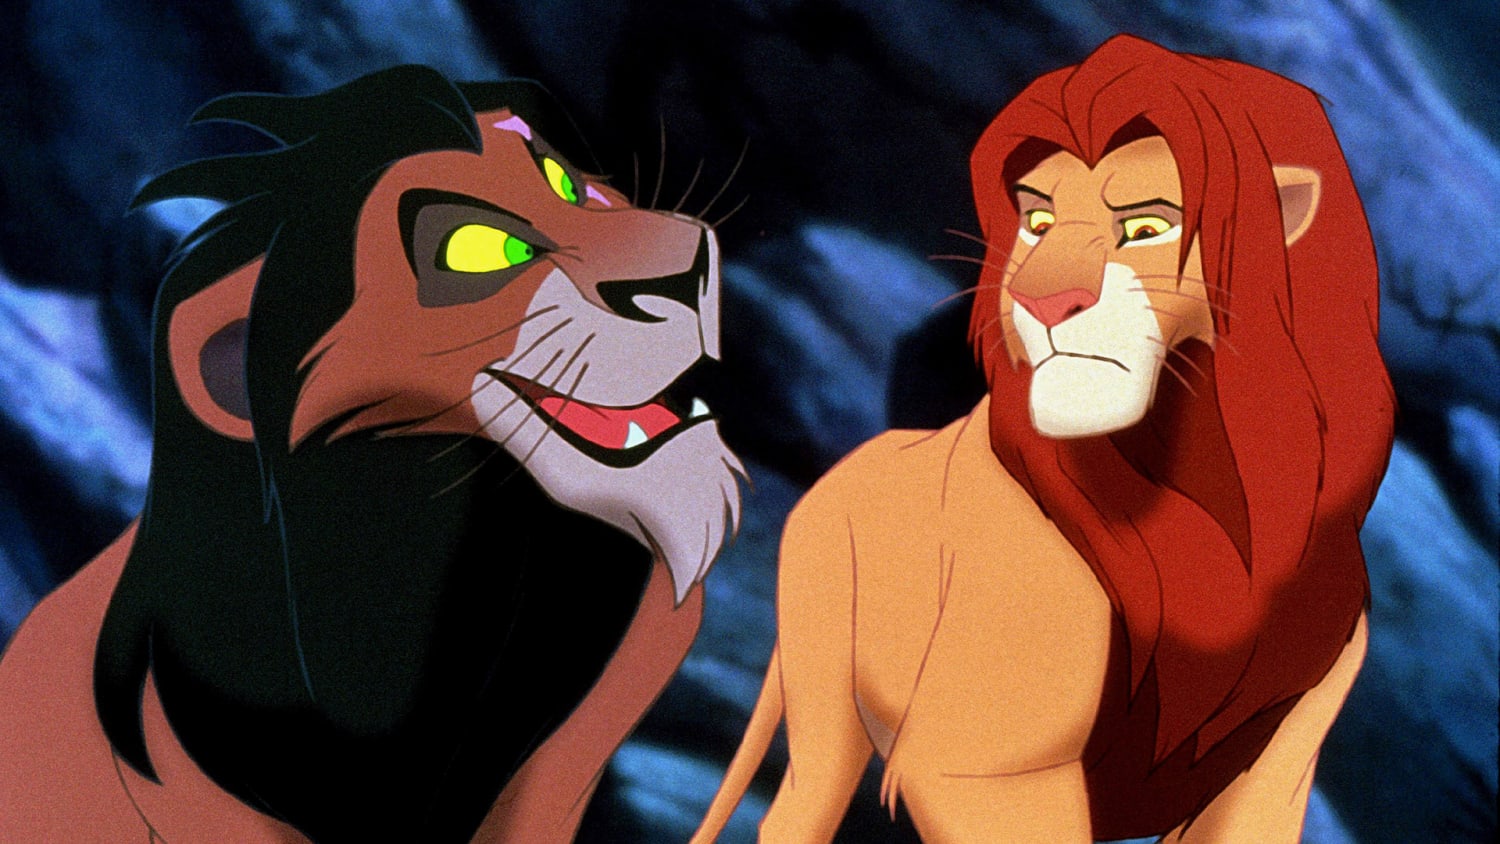 Lion King' producer reveals shocking truth about Scar, Mufasa.